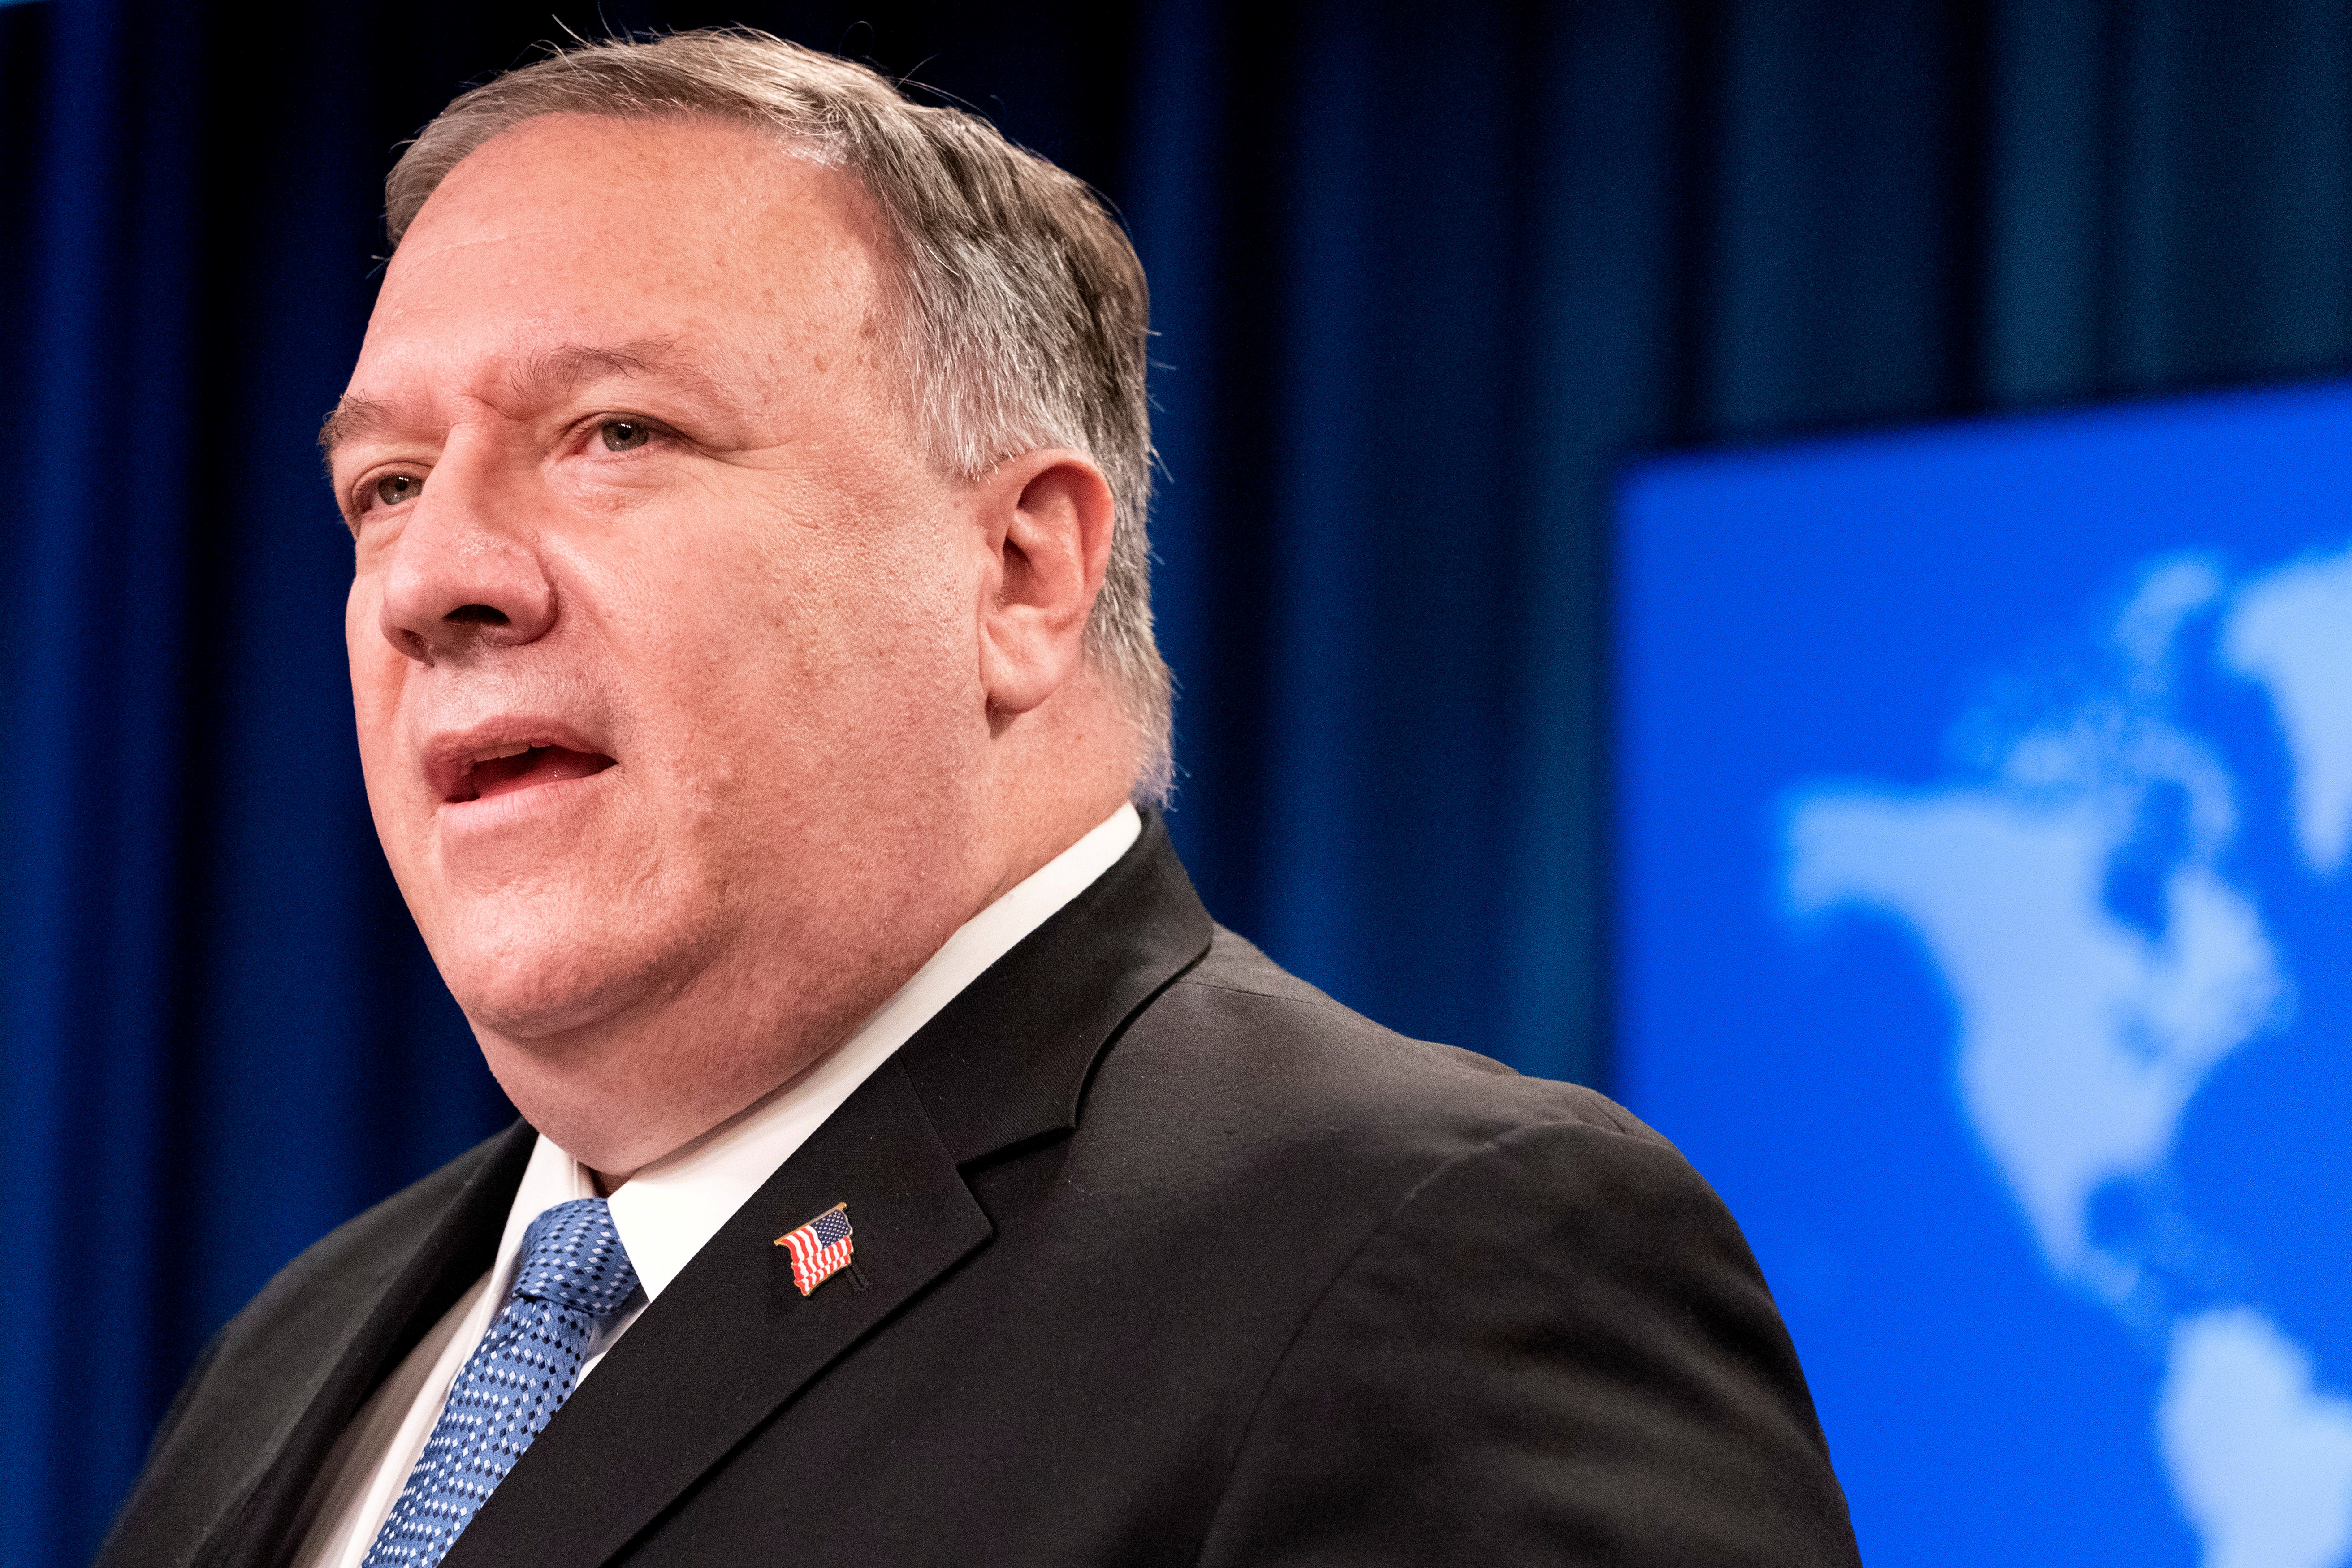 U.S. Secretary of State Mike Pompeo speaks during a media briefing at the State Department in Washington, U.S., November 10, 2020. Jacquelyn Martin/Pool via REUTERS/File Photo